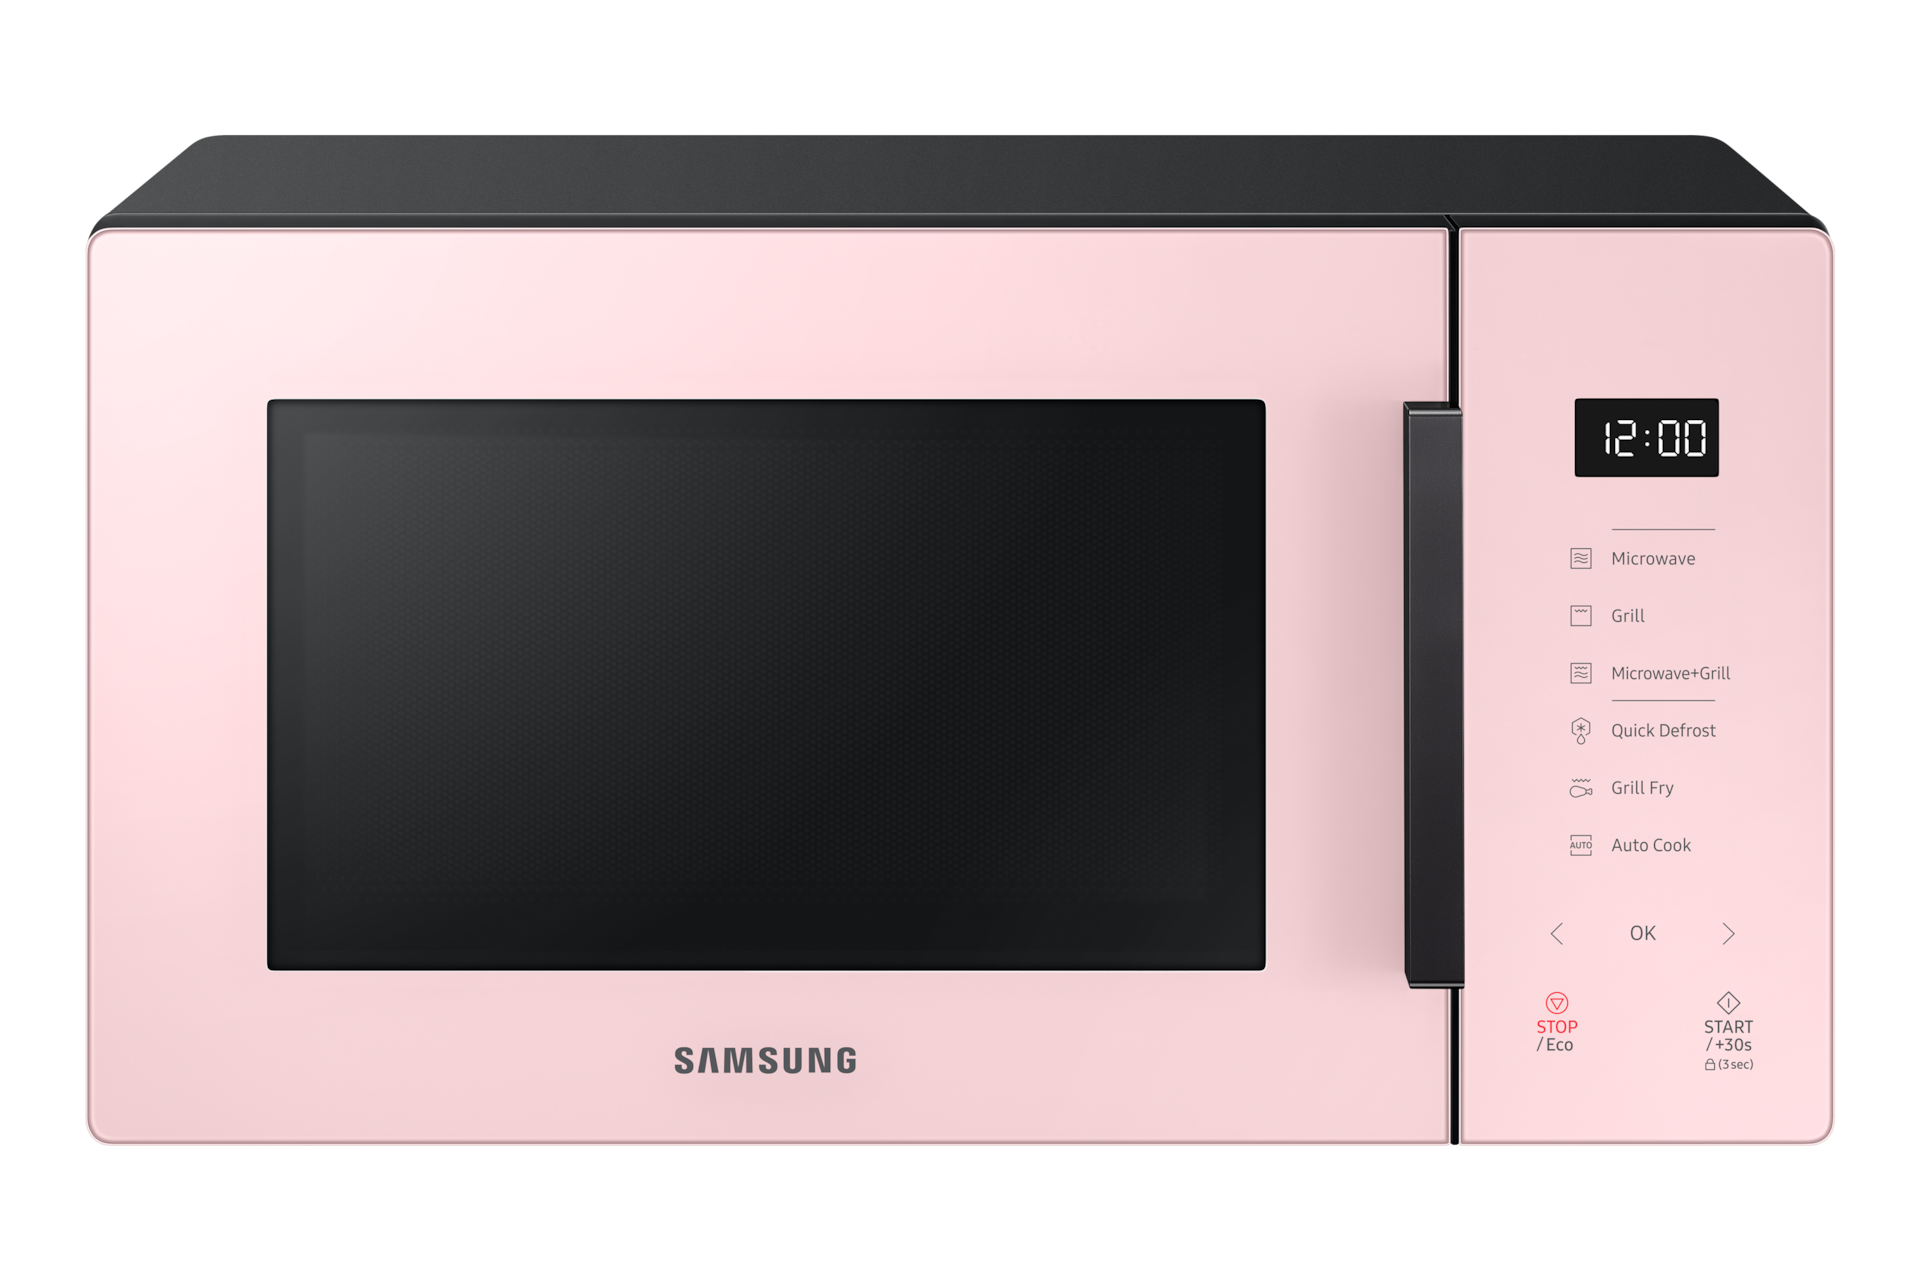 https://images.samsung.com/is/image/samsung/it-microwave-oven-grill-mg23t5018cp-mg23t5018cp-et-frontpink-249050261?$650_519_PNG$